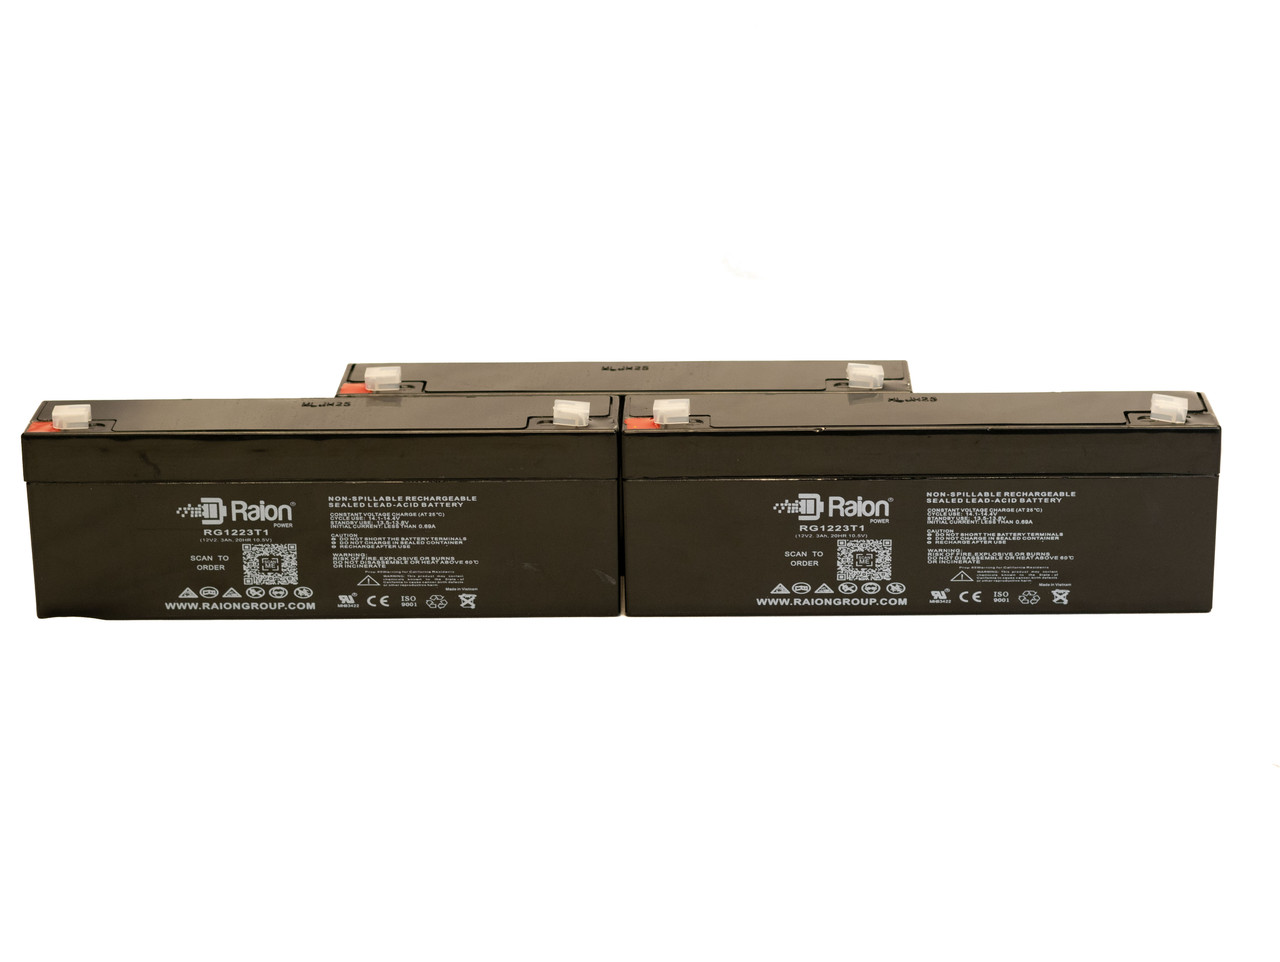 Raion Power 12V 2.3Ah RG1223T1 Replacement Medical Battery for Criticare Systems 602 11 - 3 Pack